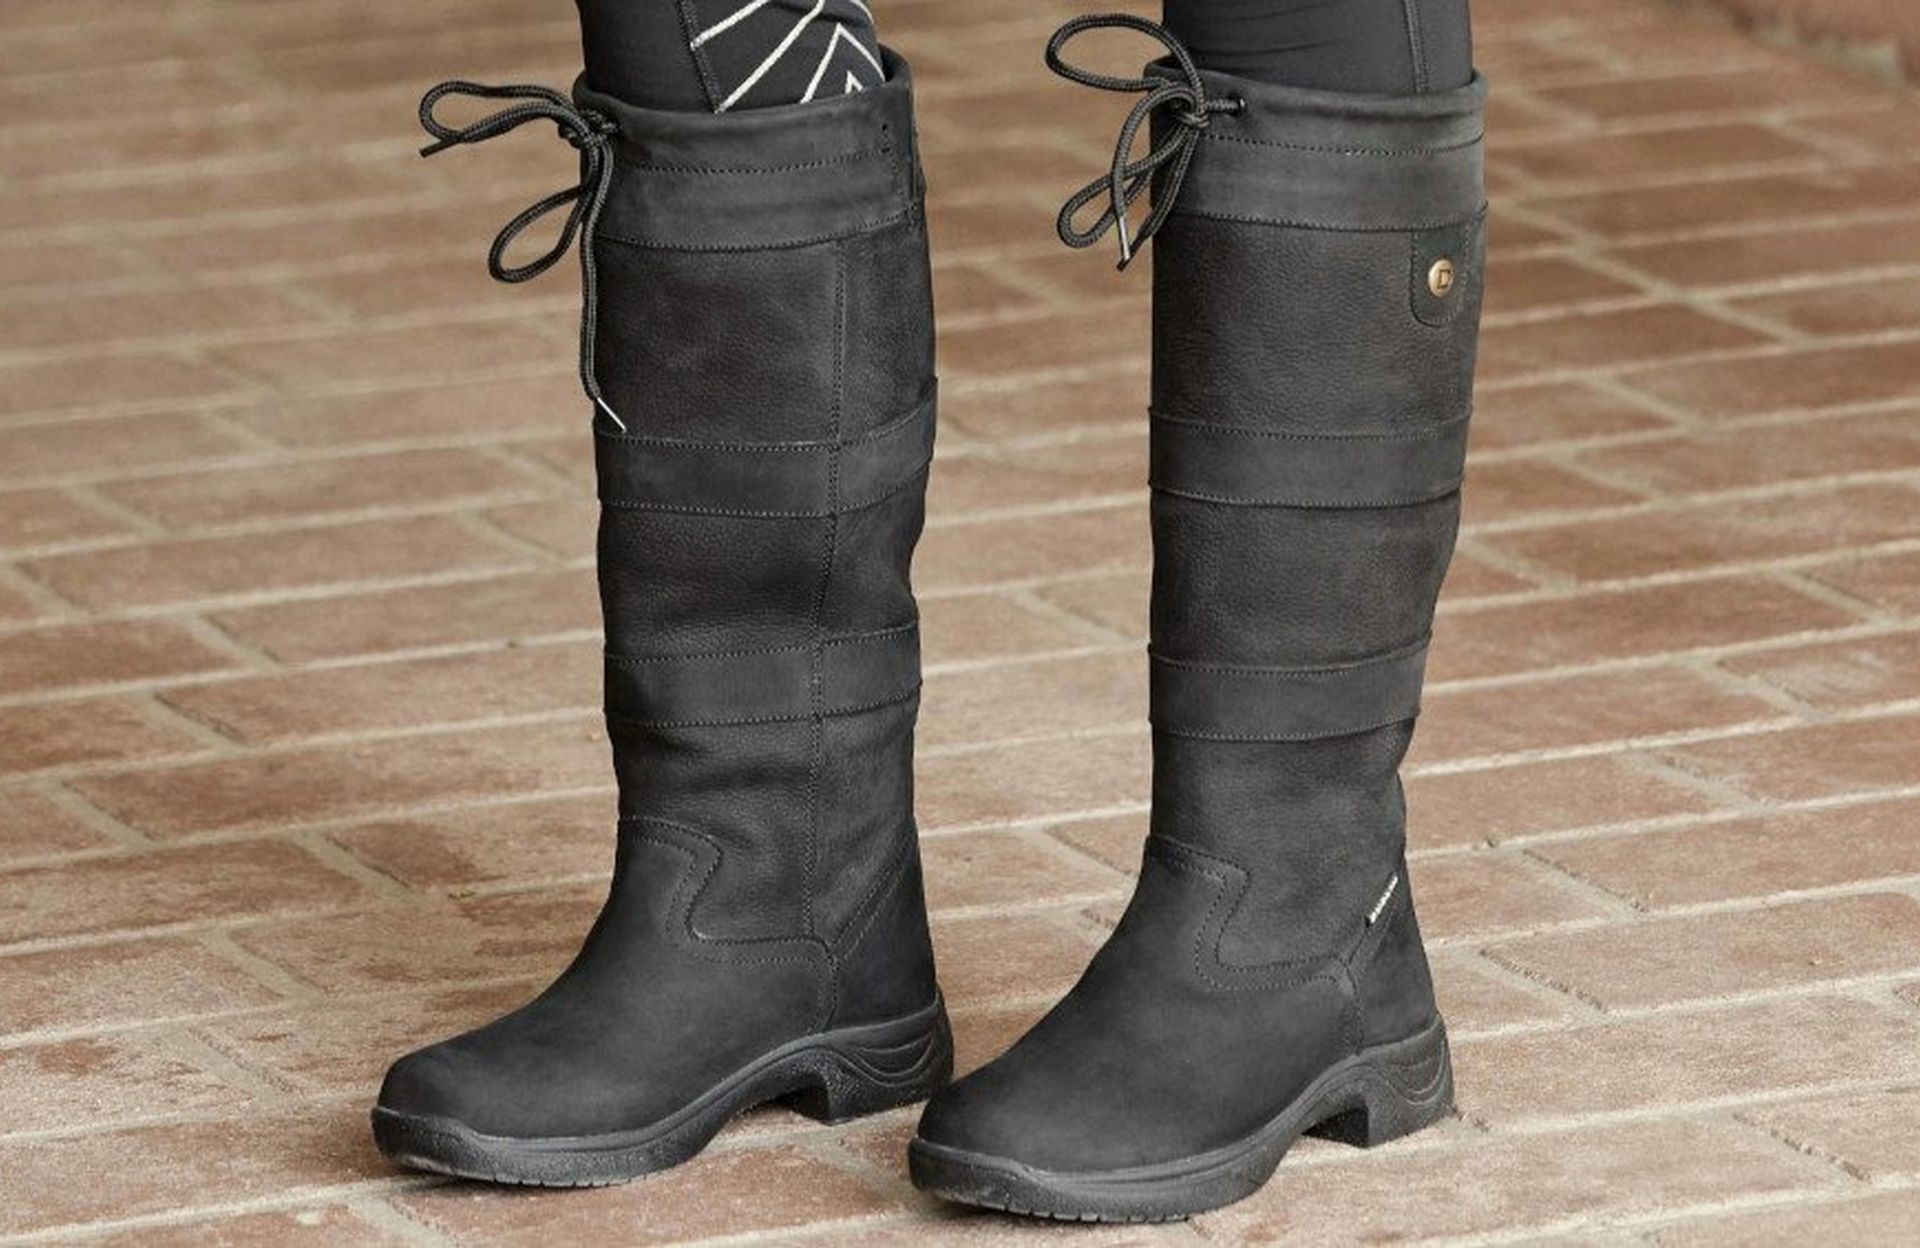 Country Boots & Wellies – Our Footwear Favourites